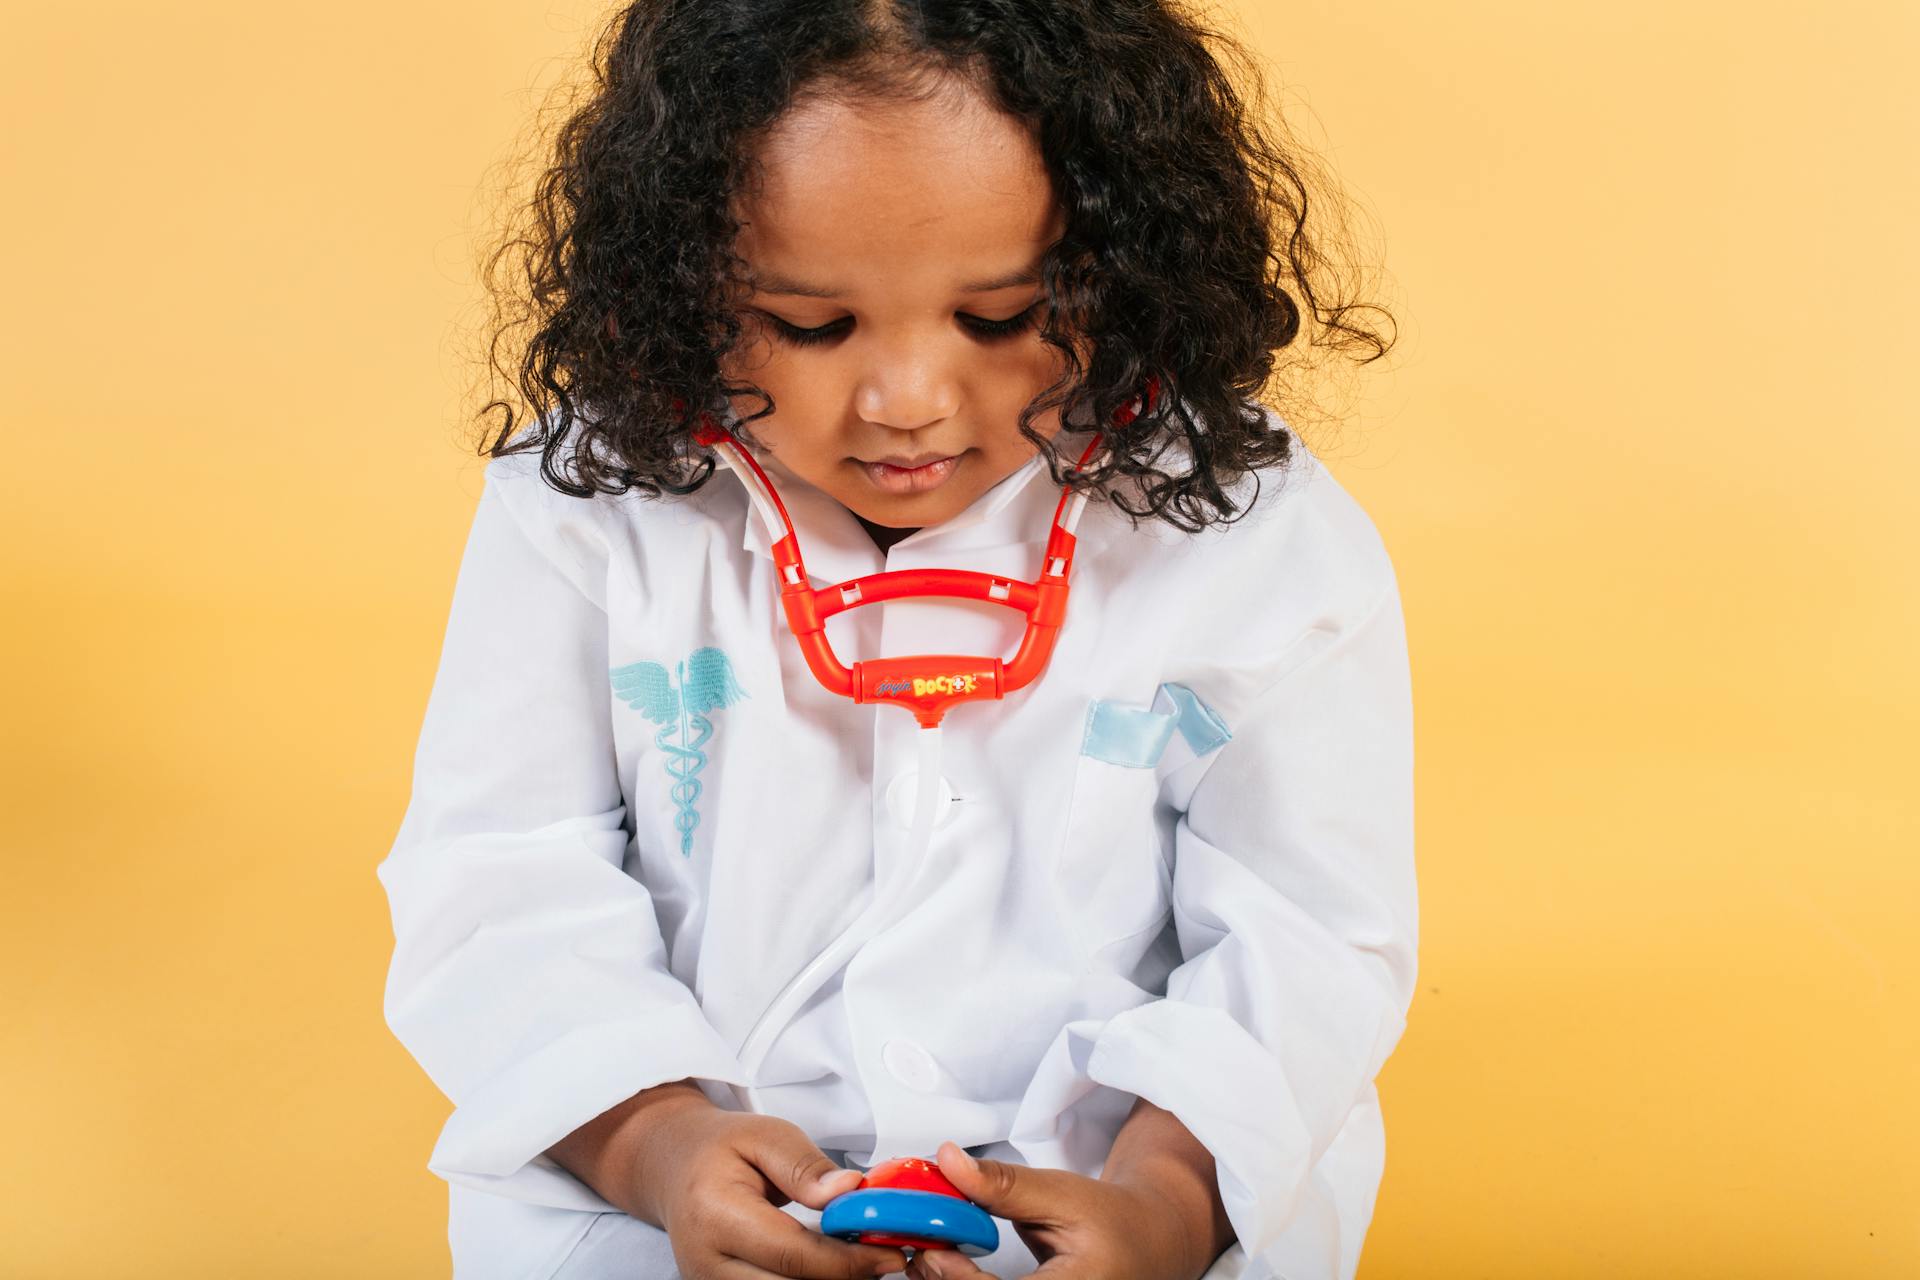 Tranquil little African American girl with curly hair in medical costume and stethoscope looking down against yellow background in studio